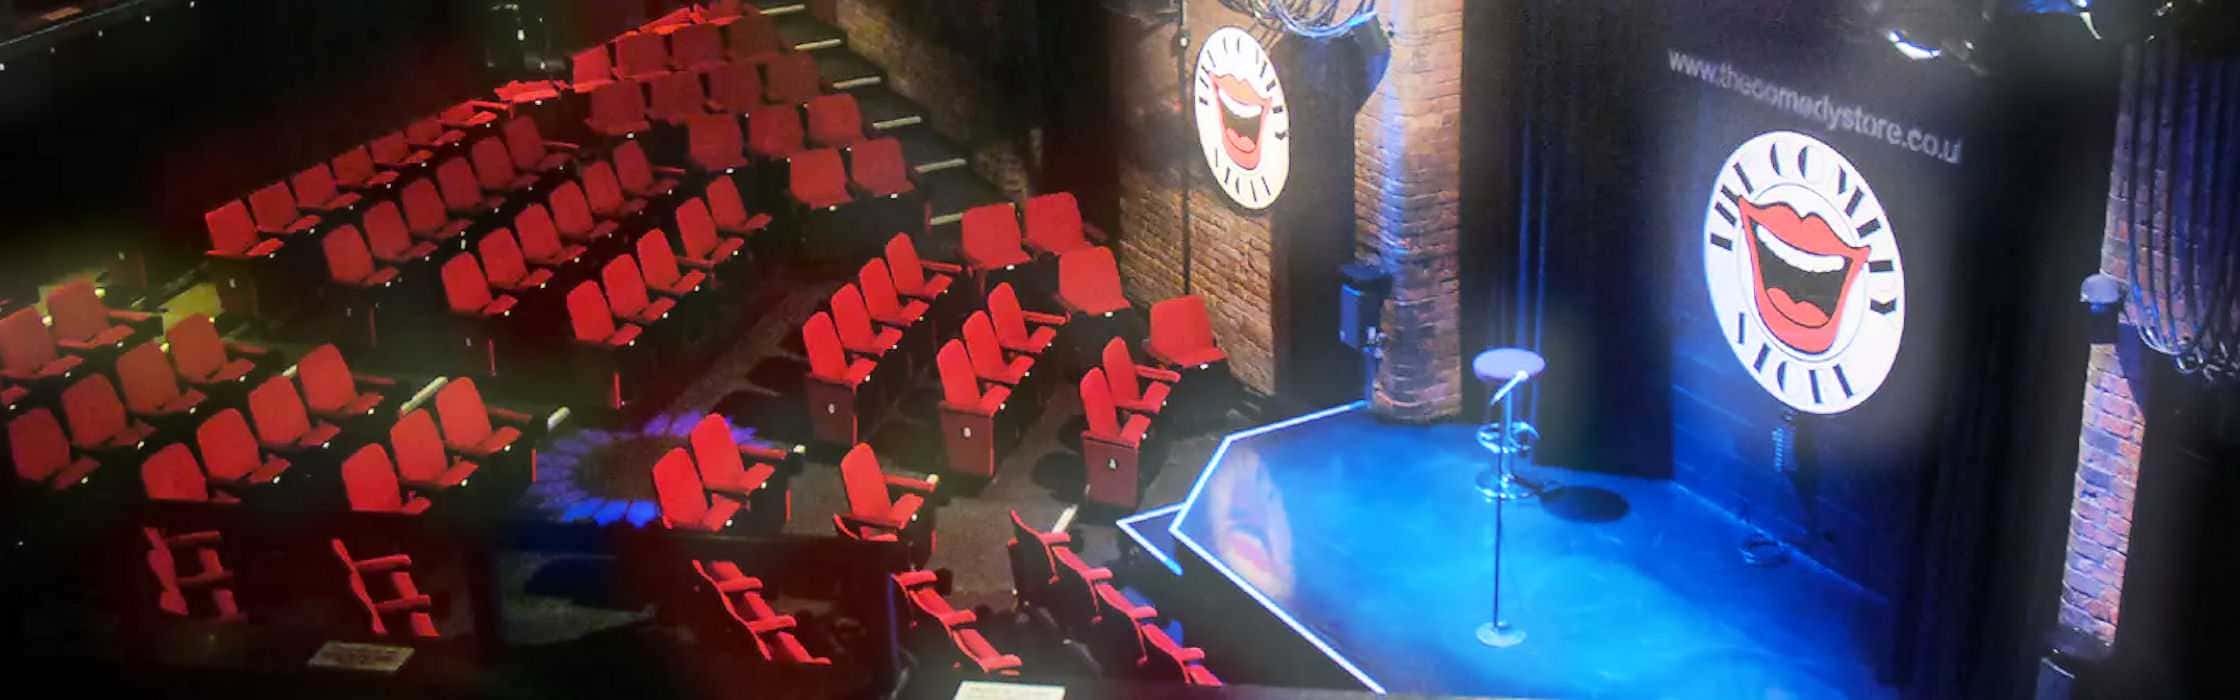 What's On at The Comedy Store, Manchester